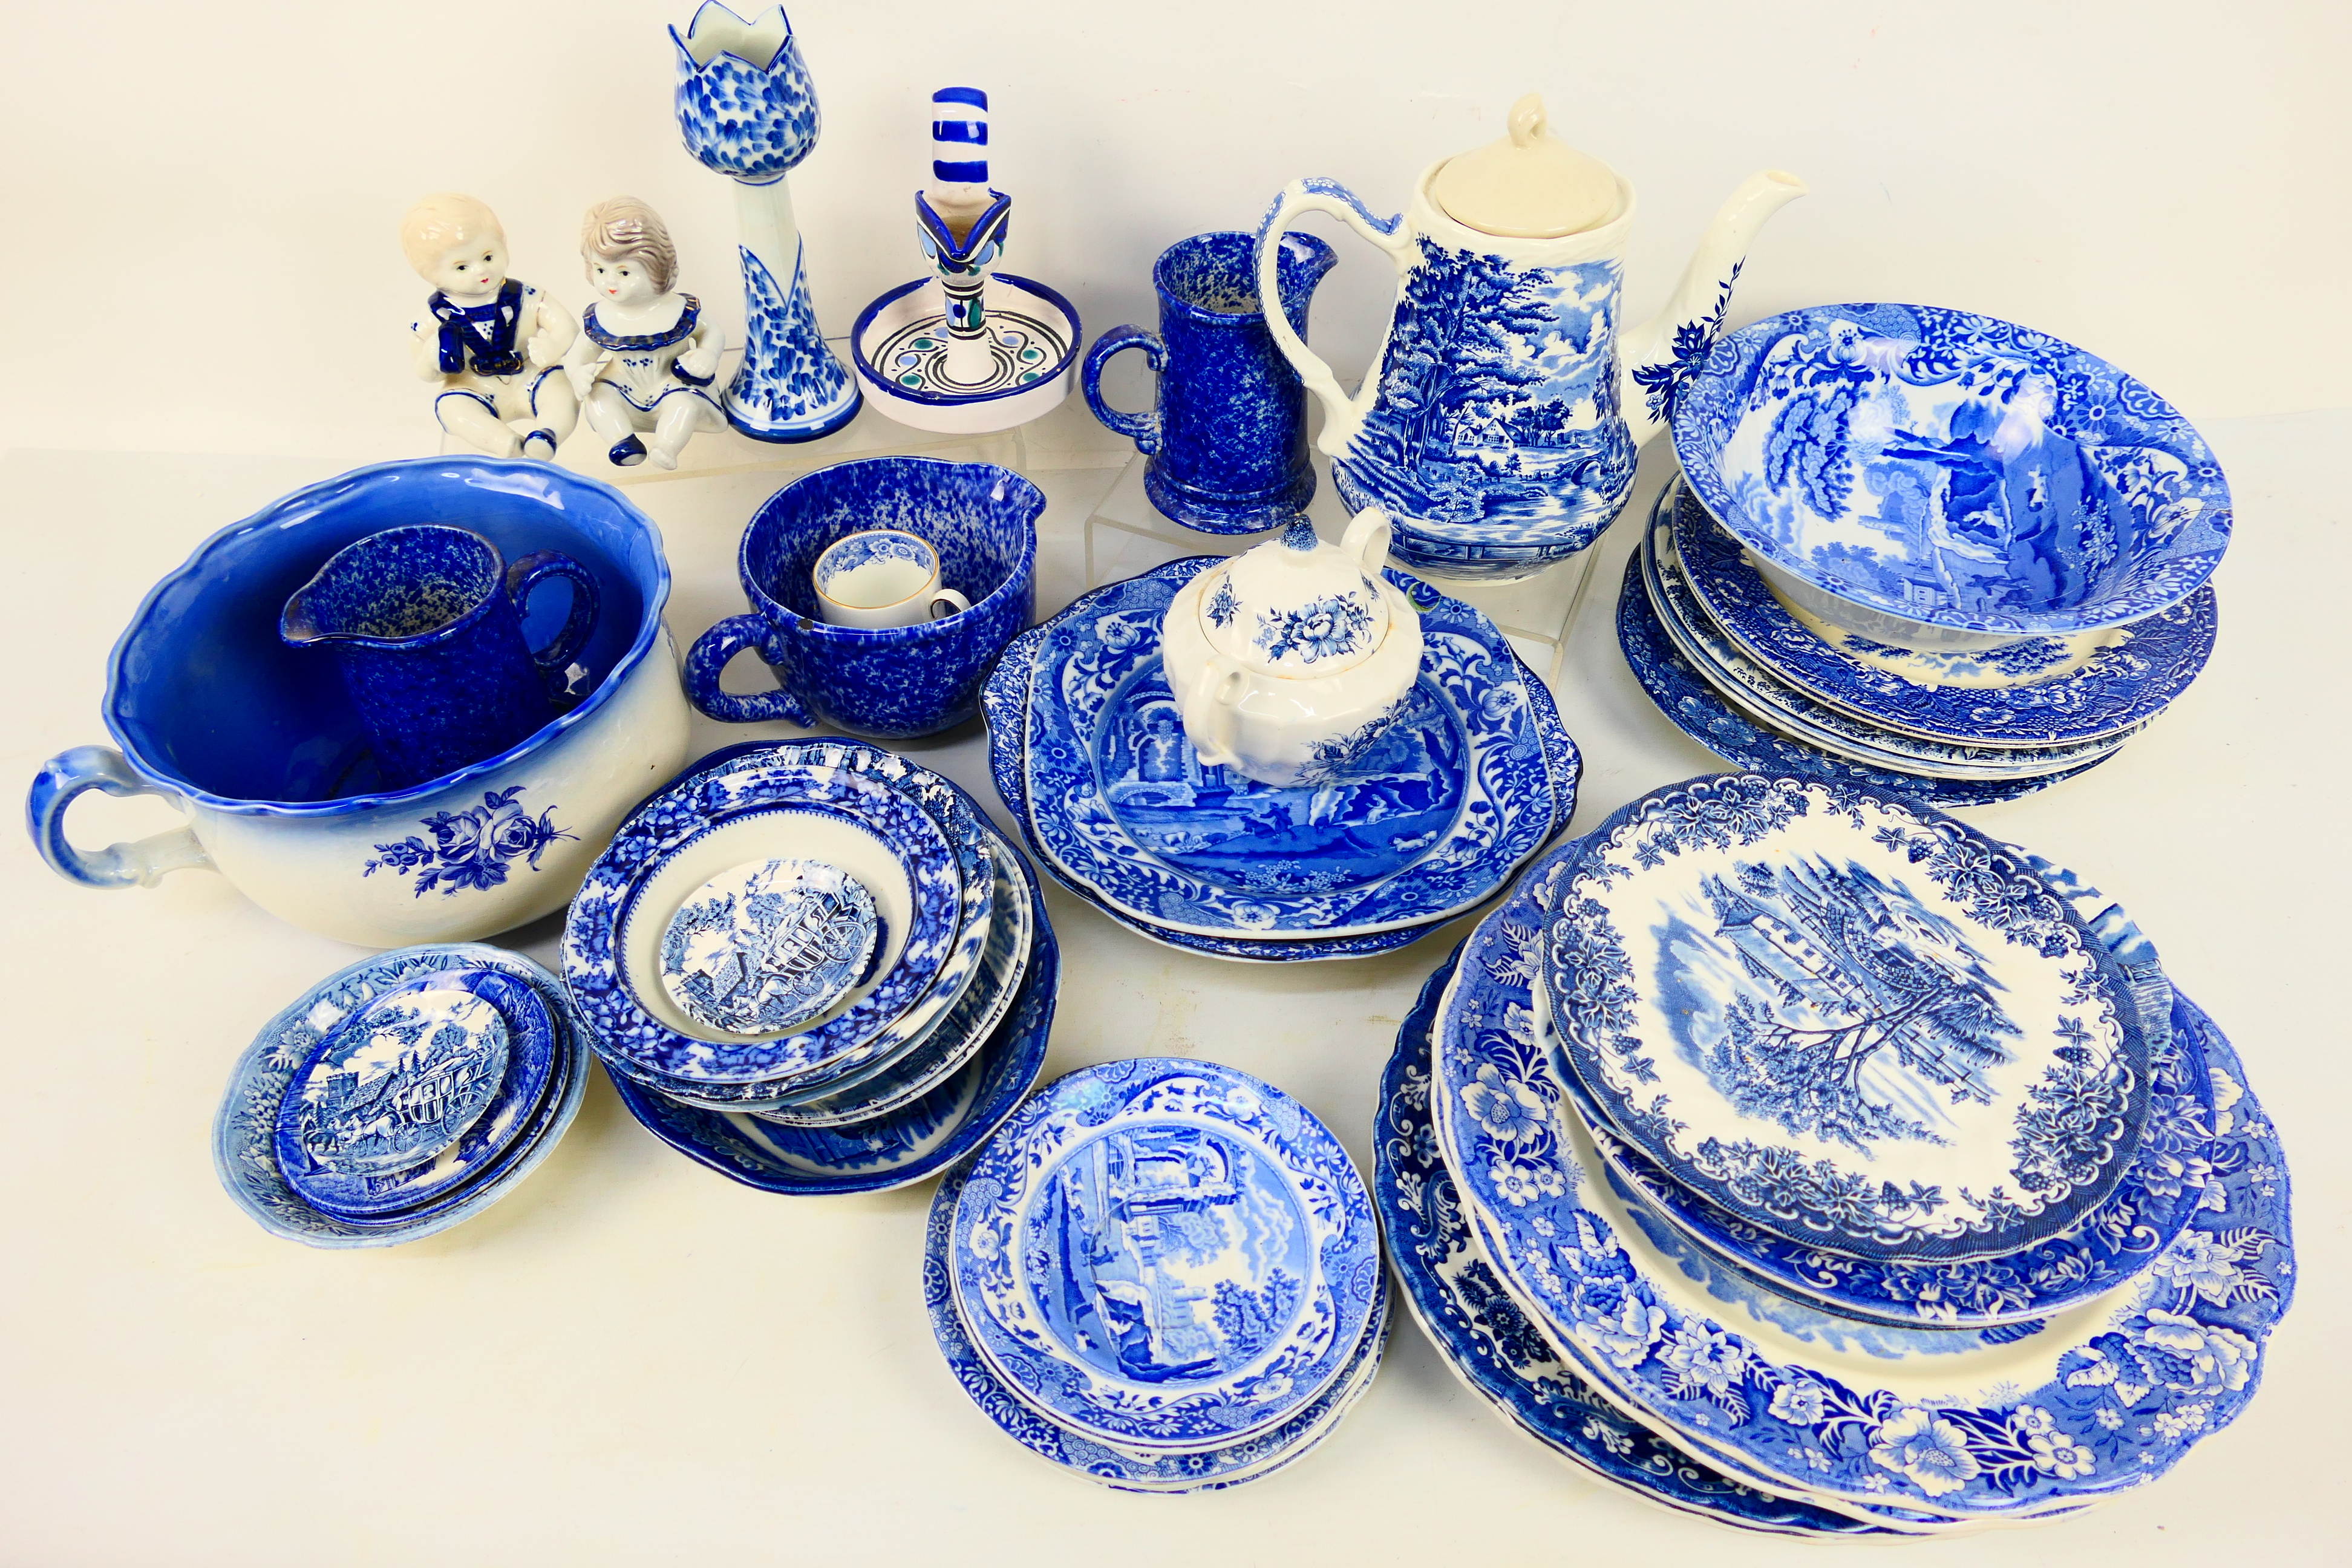 A collection of blue and white table wares, in excess of thirty pieces.